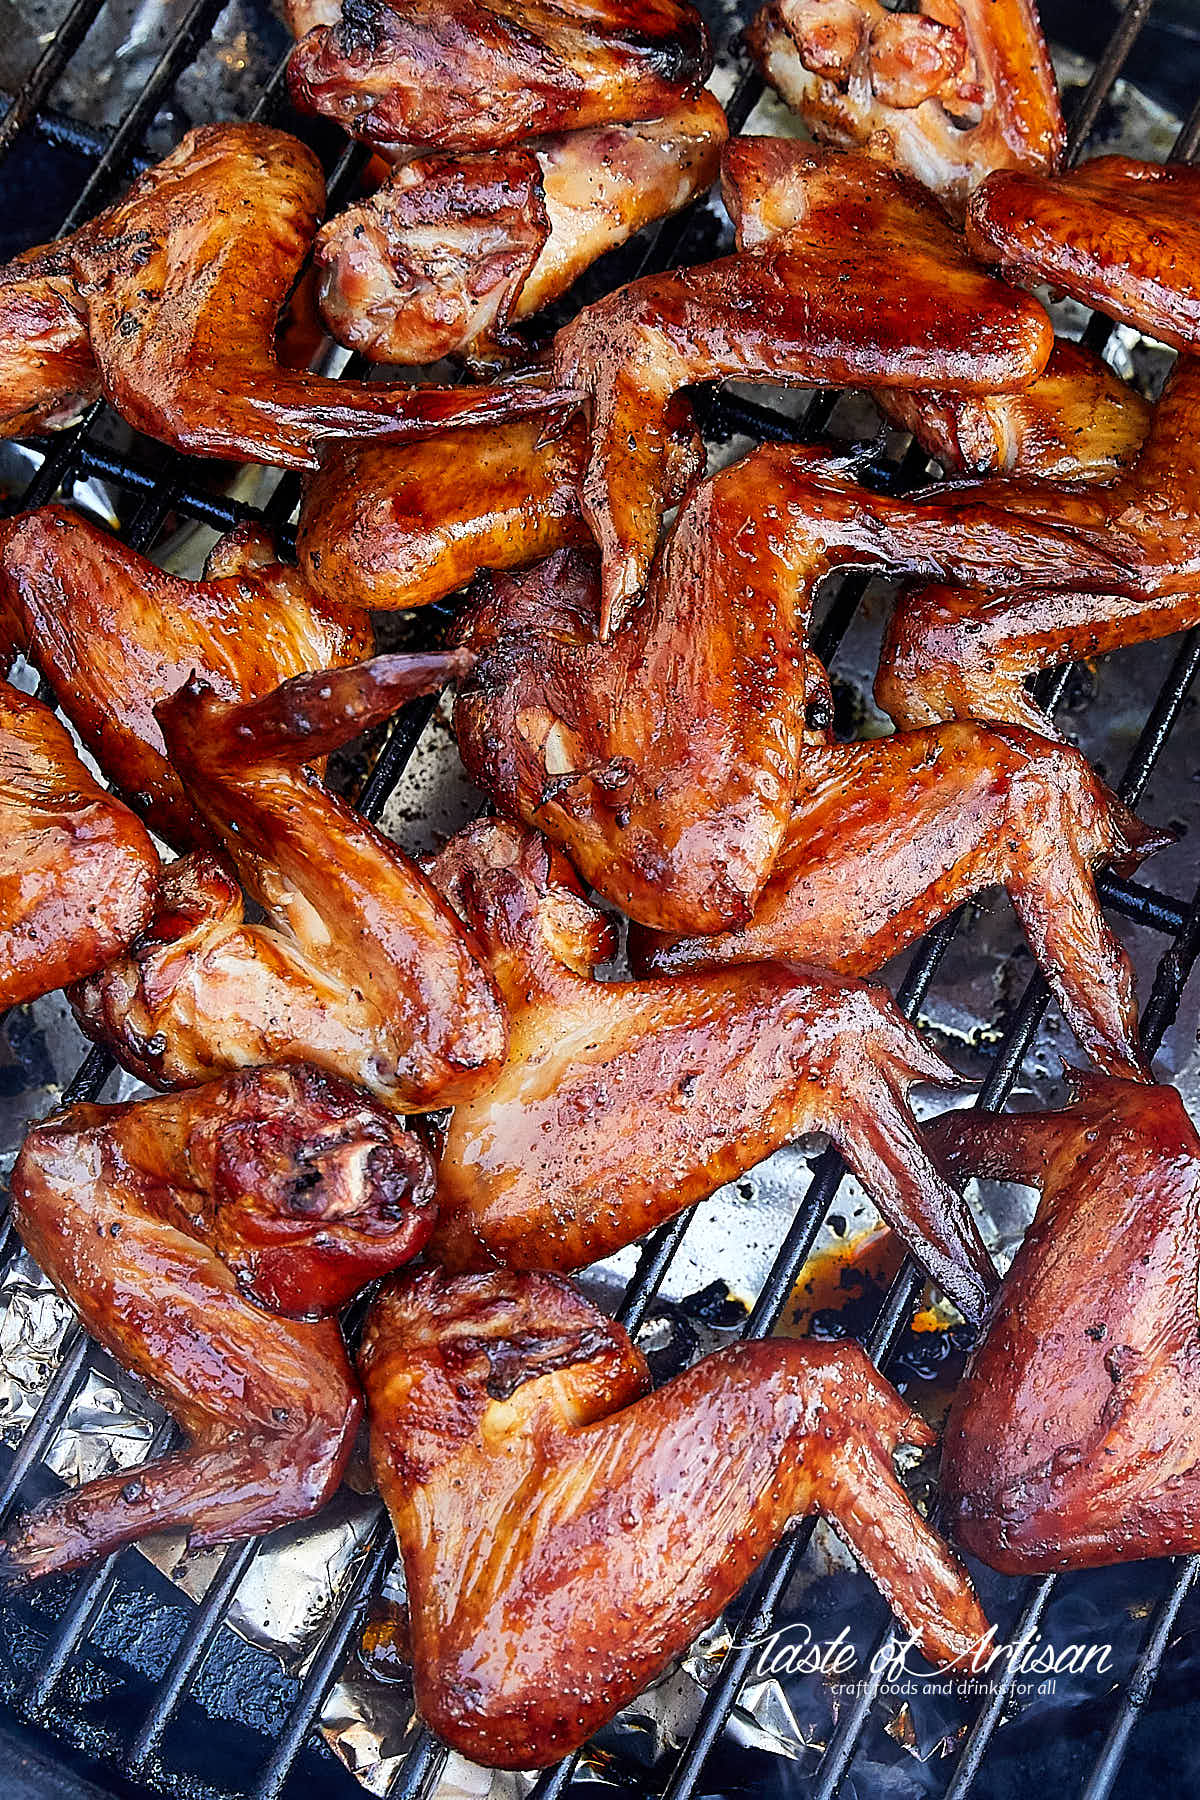 Golden-brown, smoked chicken wings on a smoker.